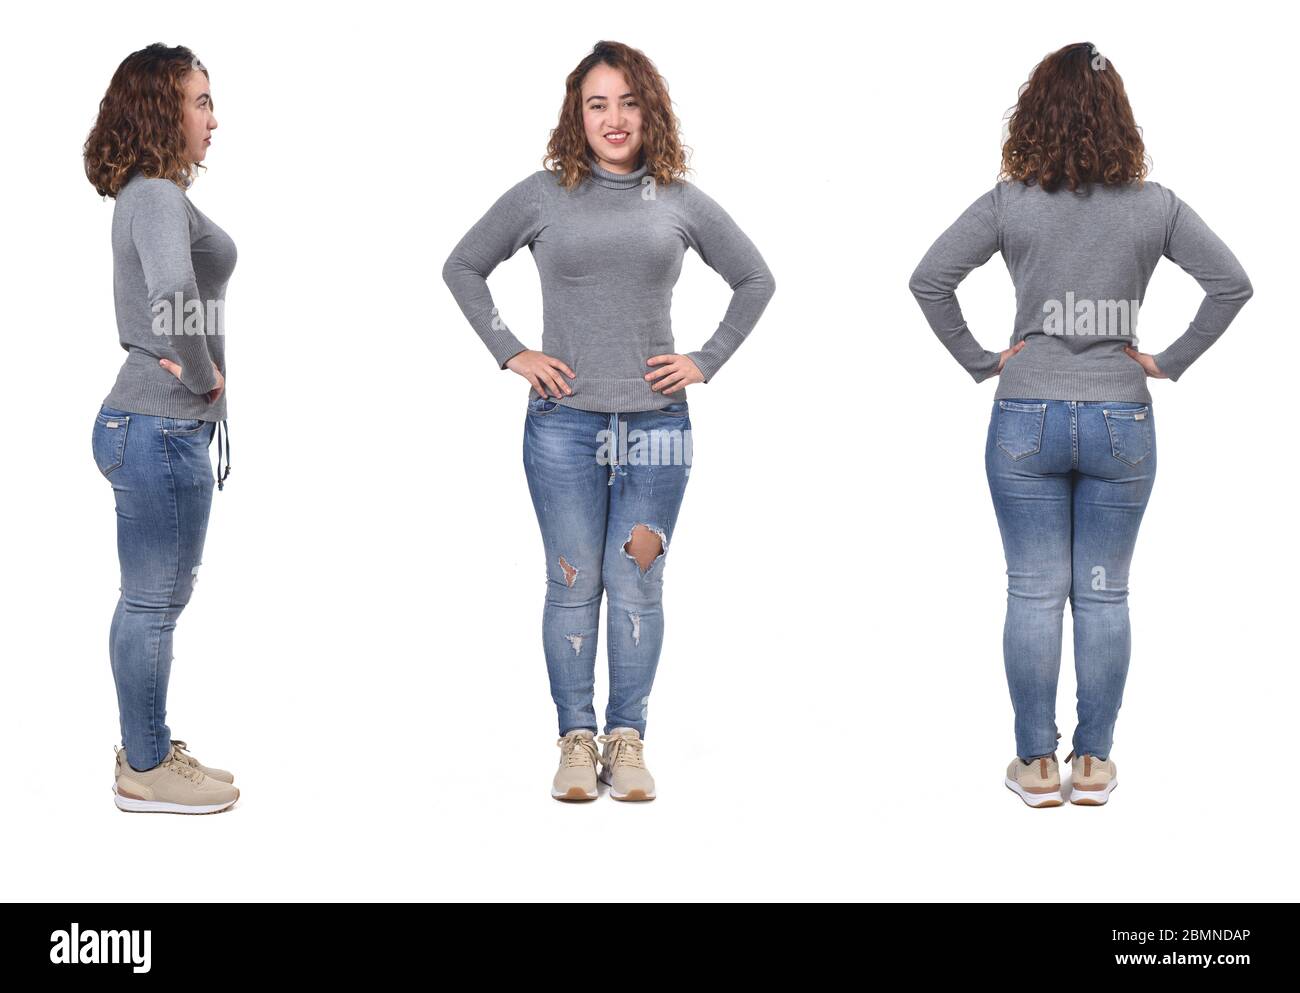 Woman With Jeans Front Back And Side View On White Background Hands